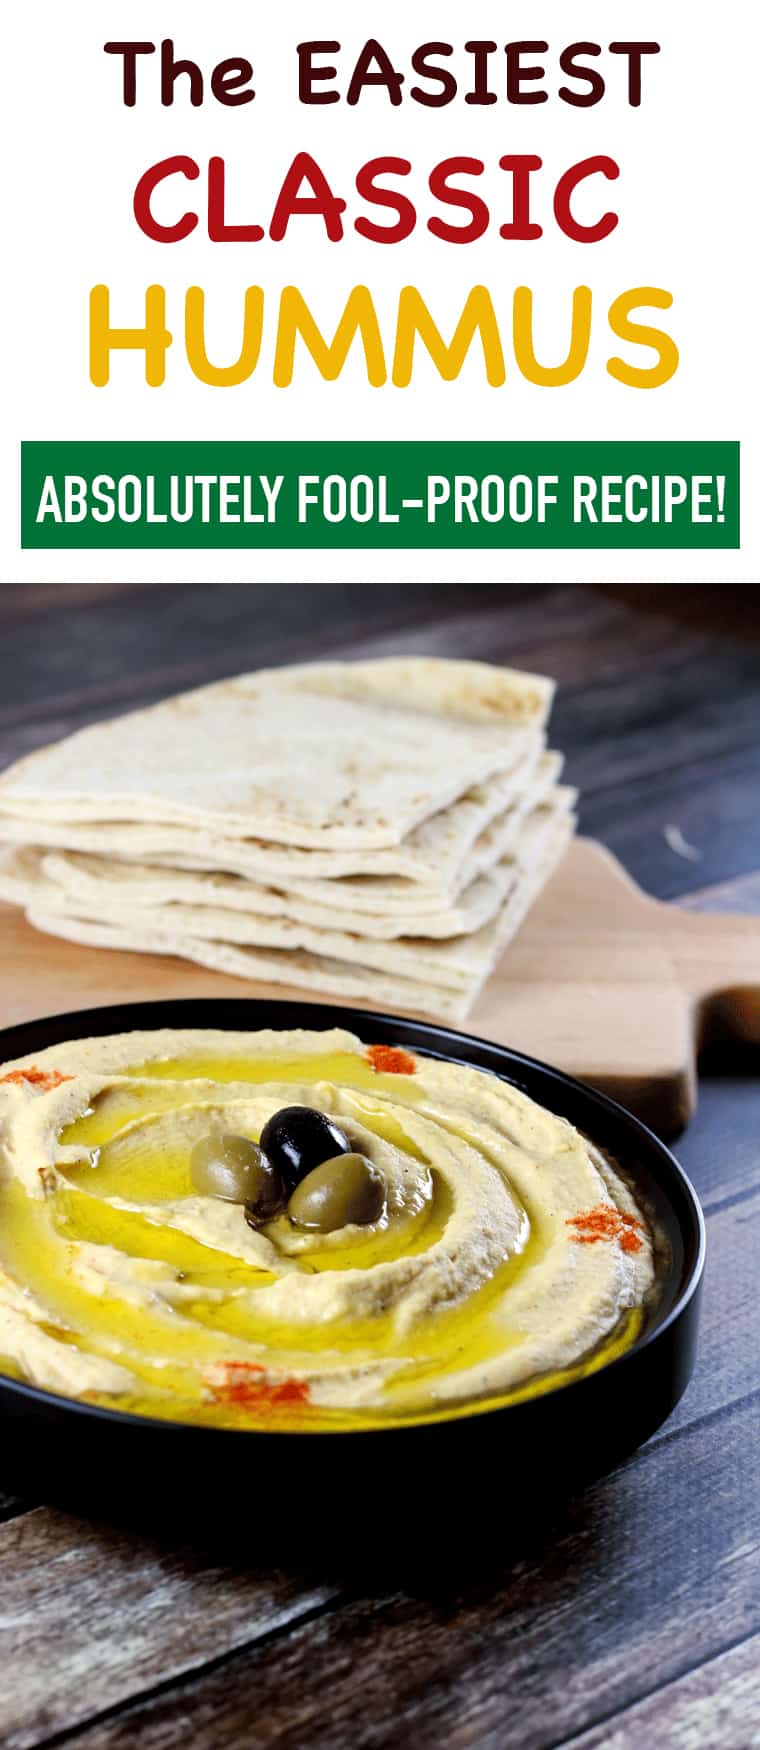 Easiest Classic Hummus - This delicious hummus is extremely easy to make and the recipe is absolutely fool proof! You don't need many ingredients for it but it tastes A-A-AMAZING and is healthy too! | ScrambledChefs.com